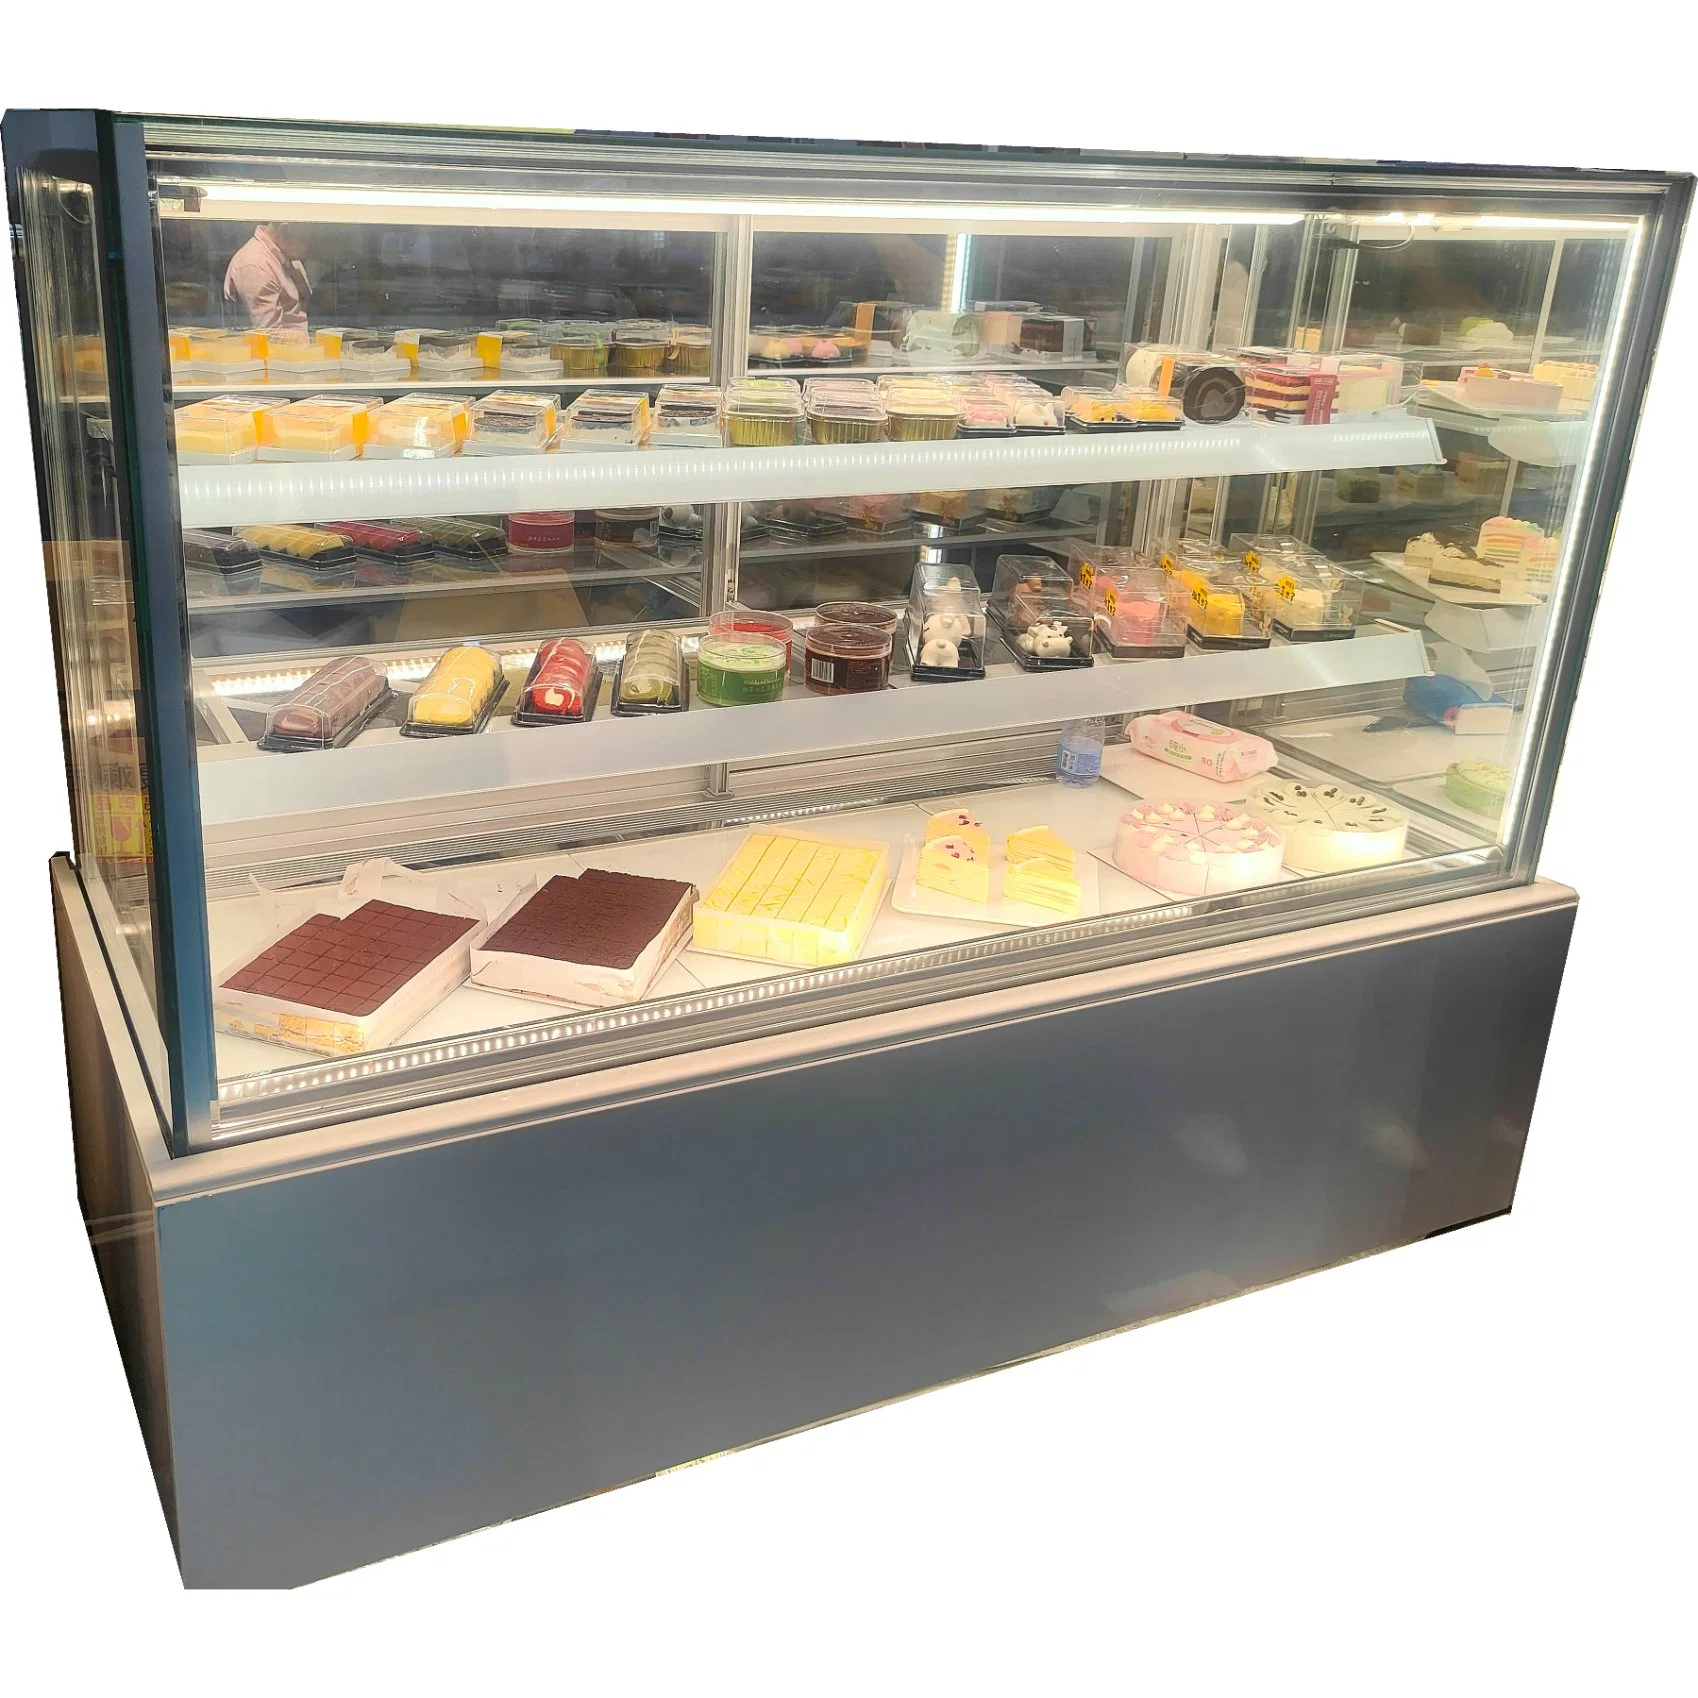 New Style Cake Display Chiller Cake Refrigerator Bakery Cake Display Refrigerator Chocolate Showcase